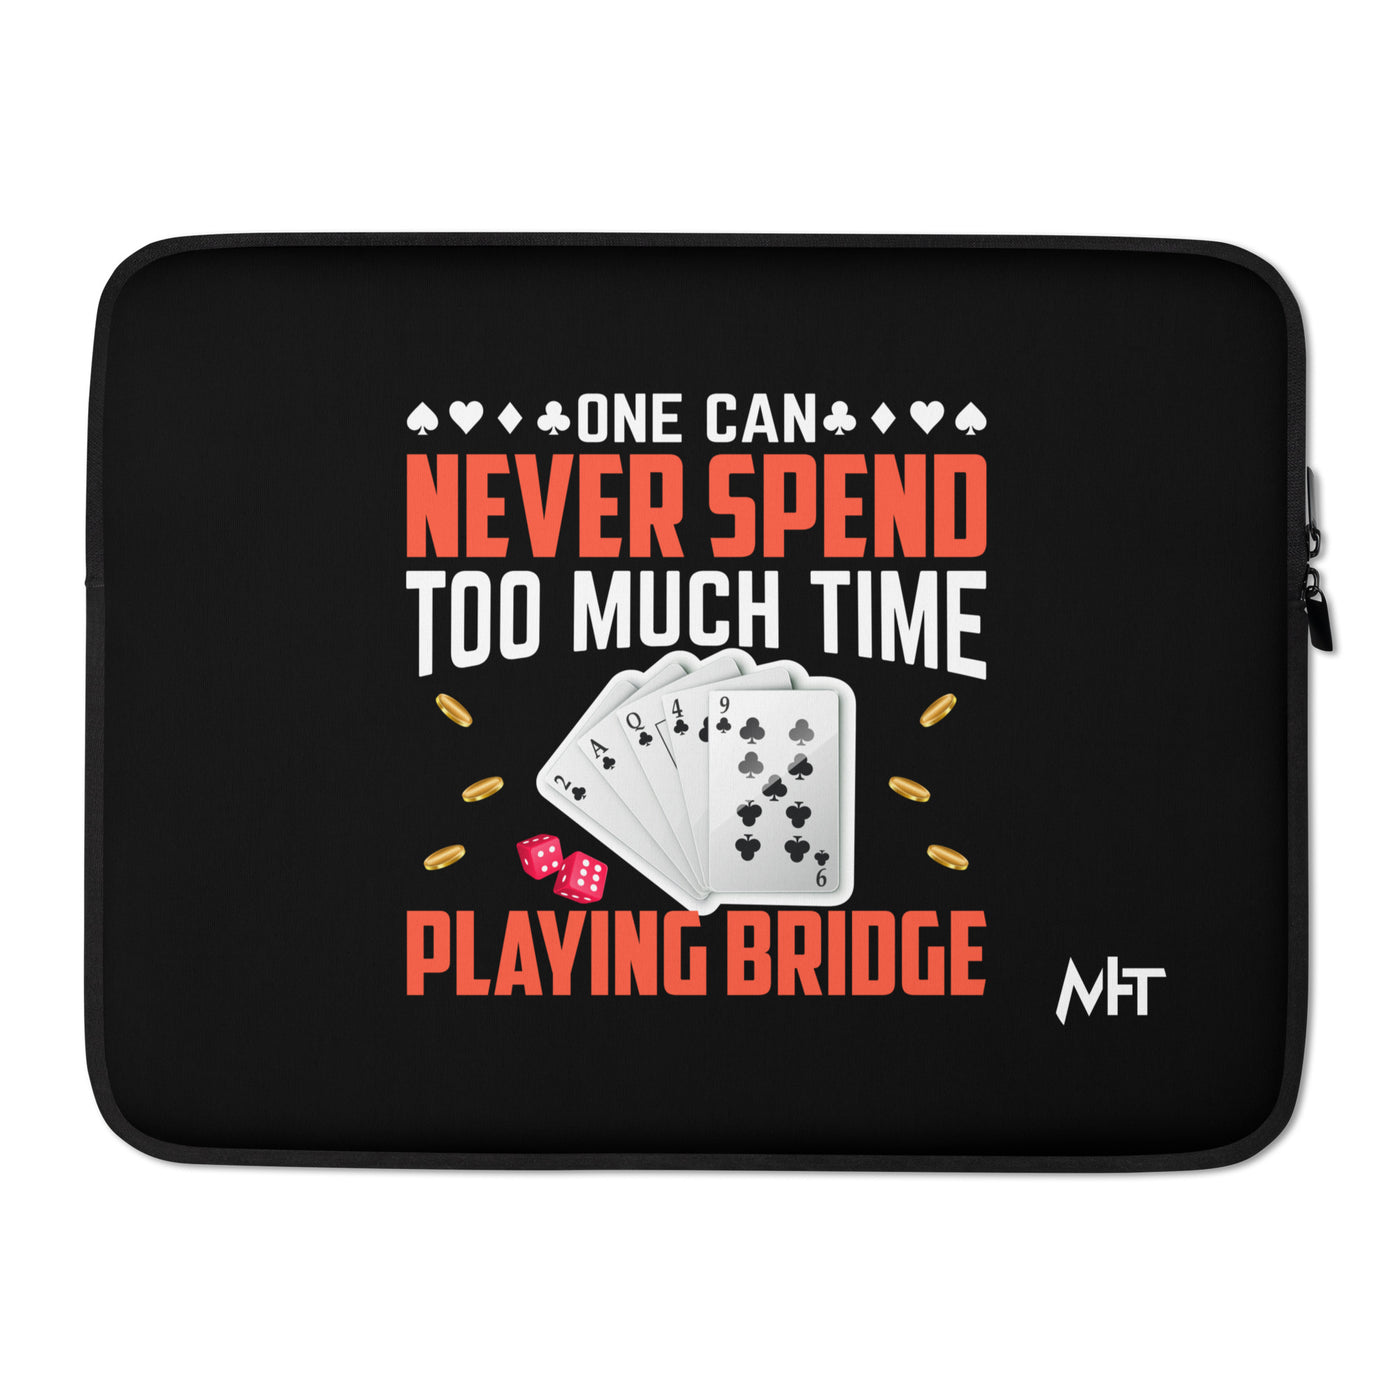 One can never Spend too much Time playing Bridge - Laptop Sleeve